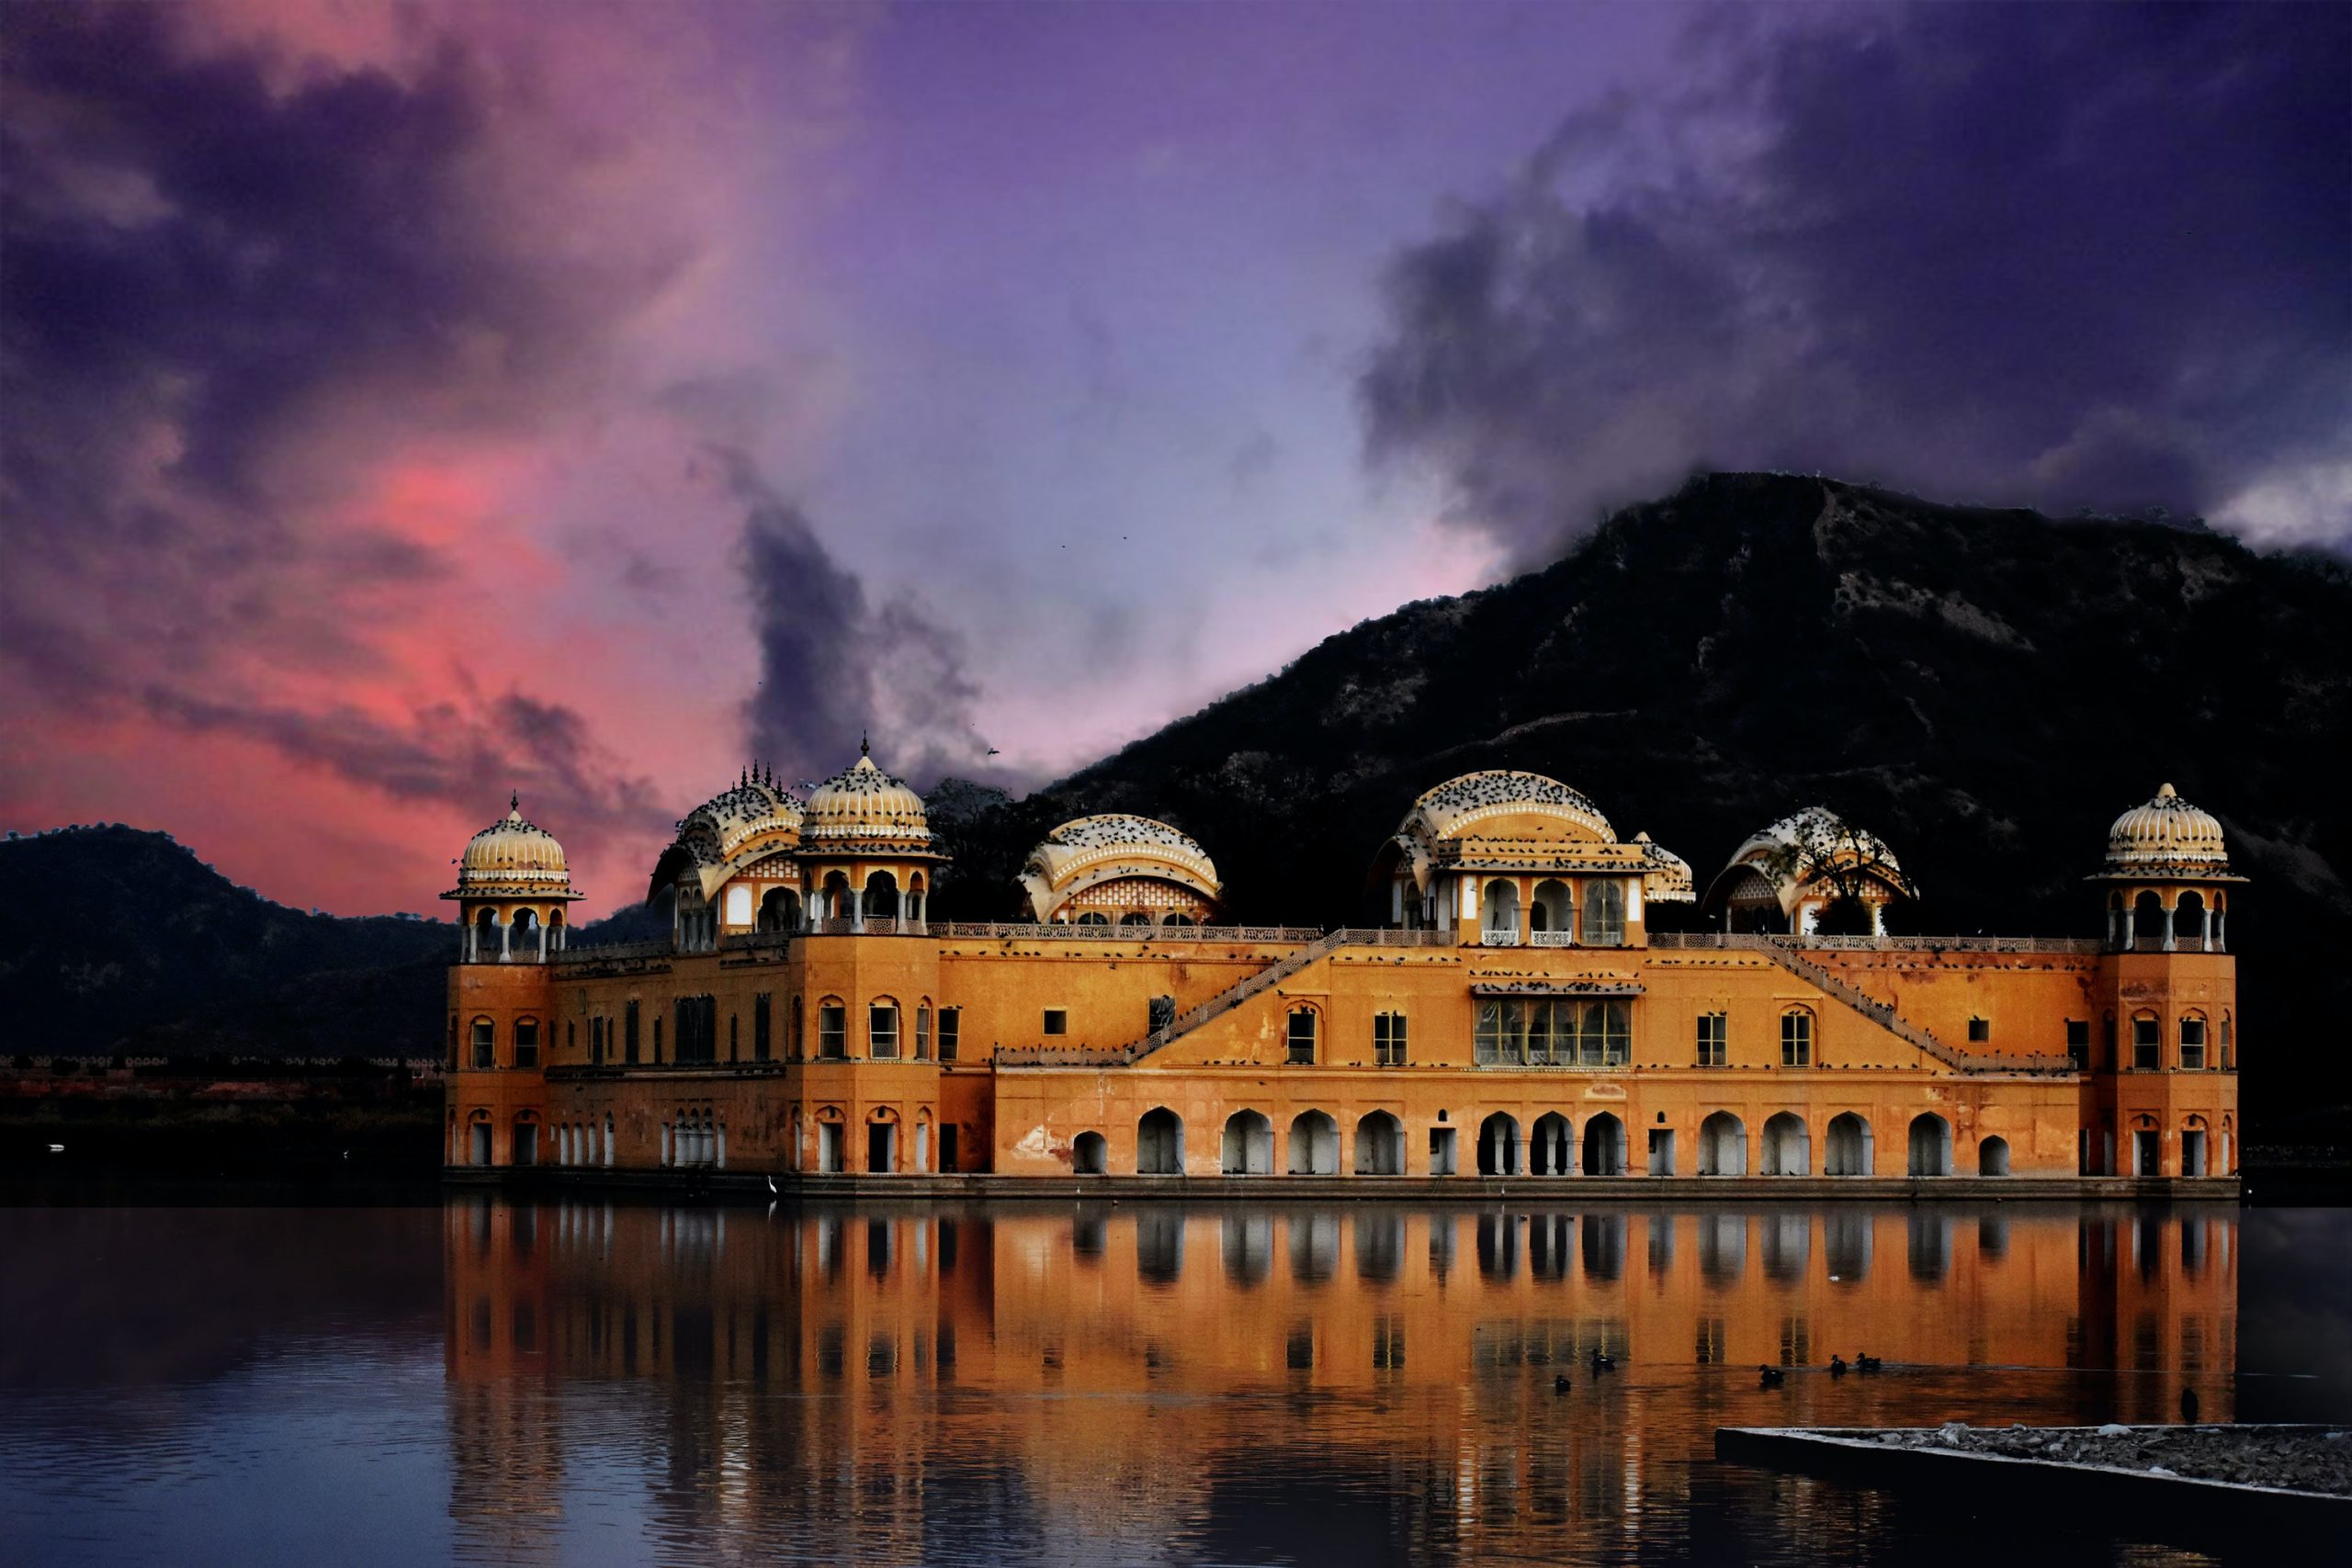 Jal Mahal scaled